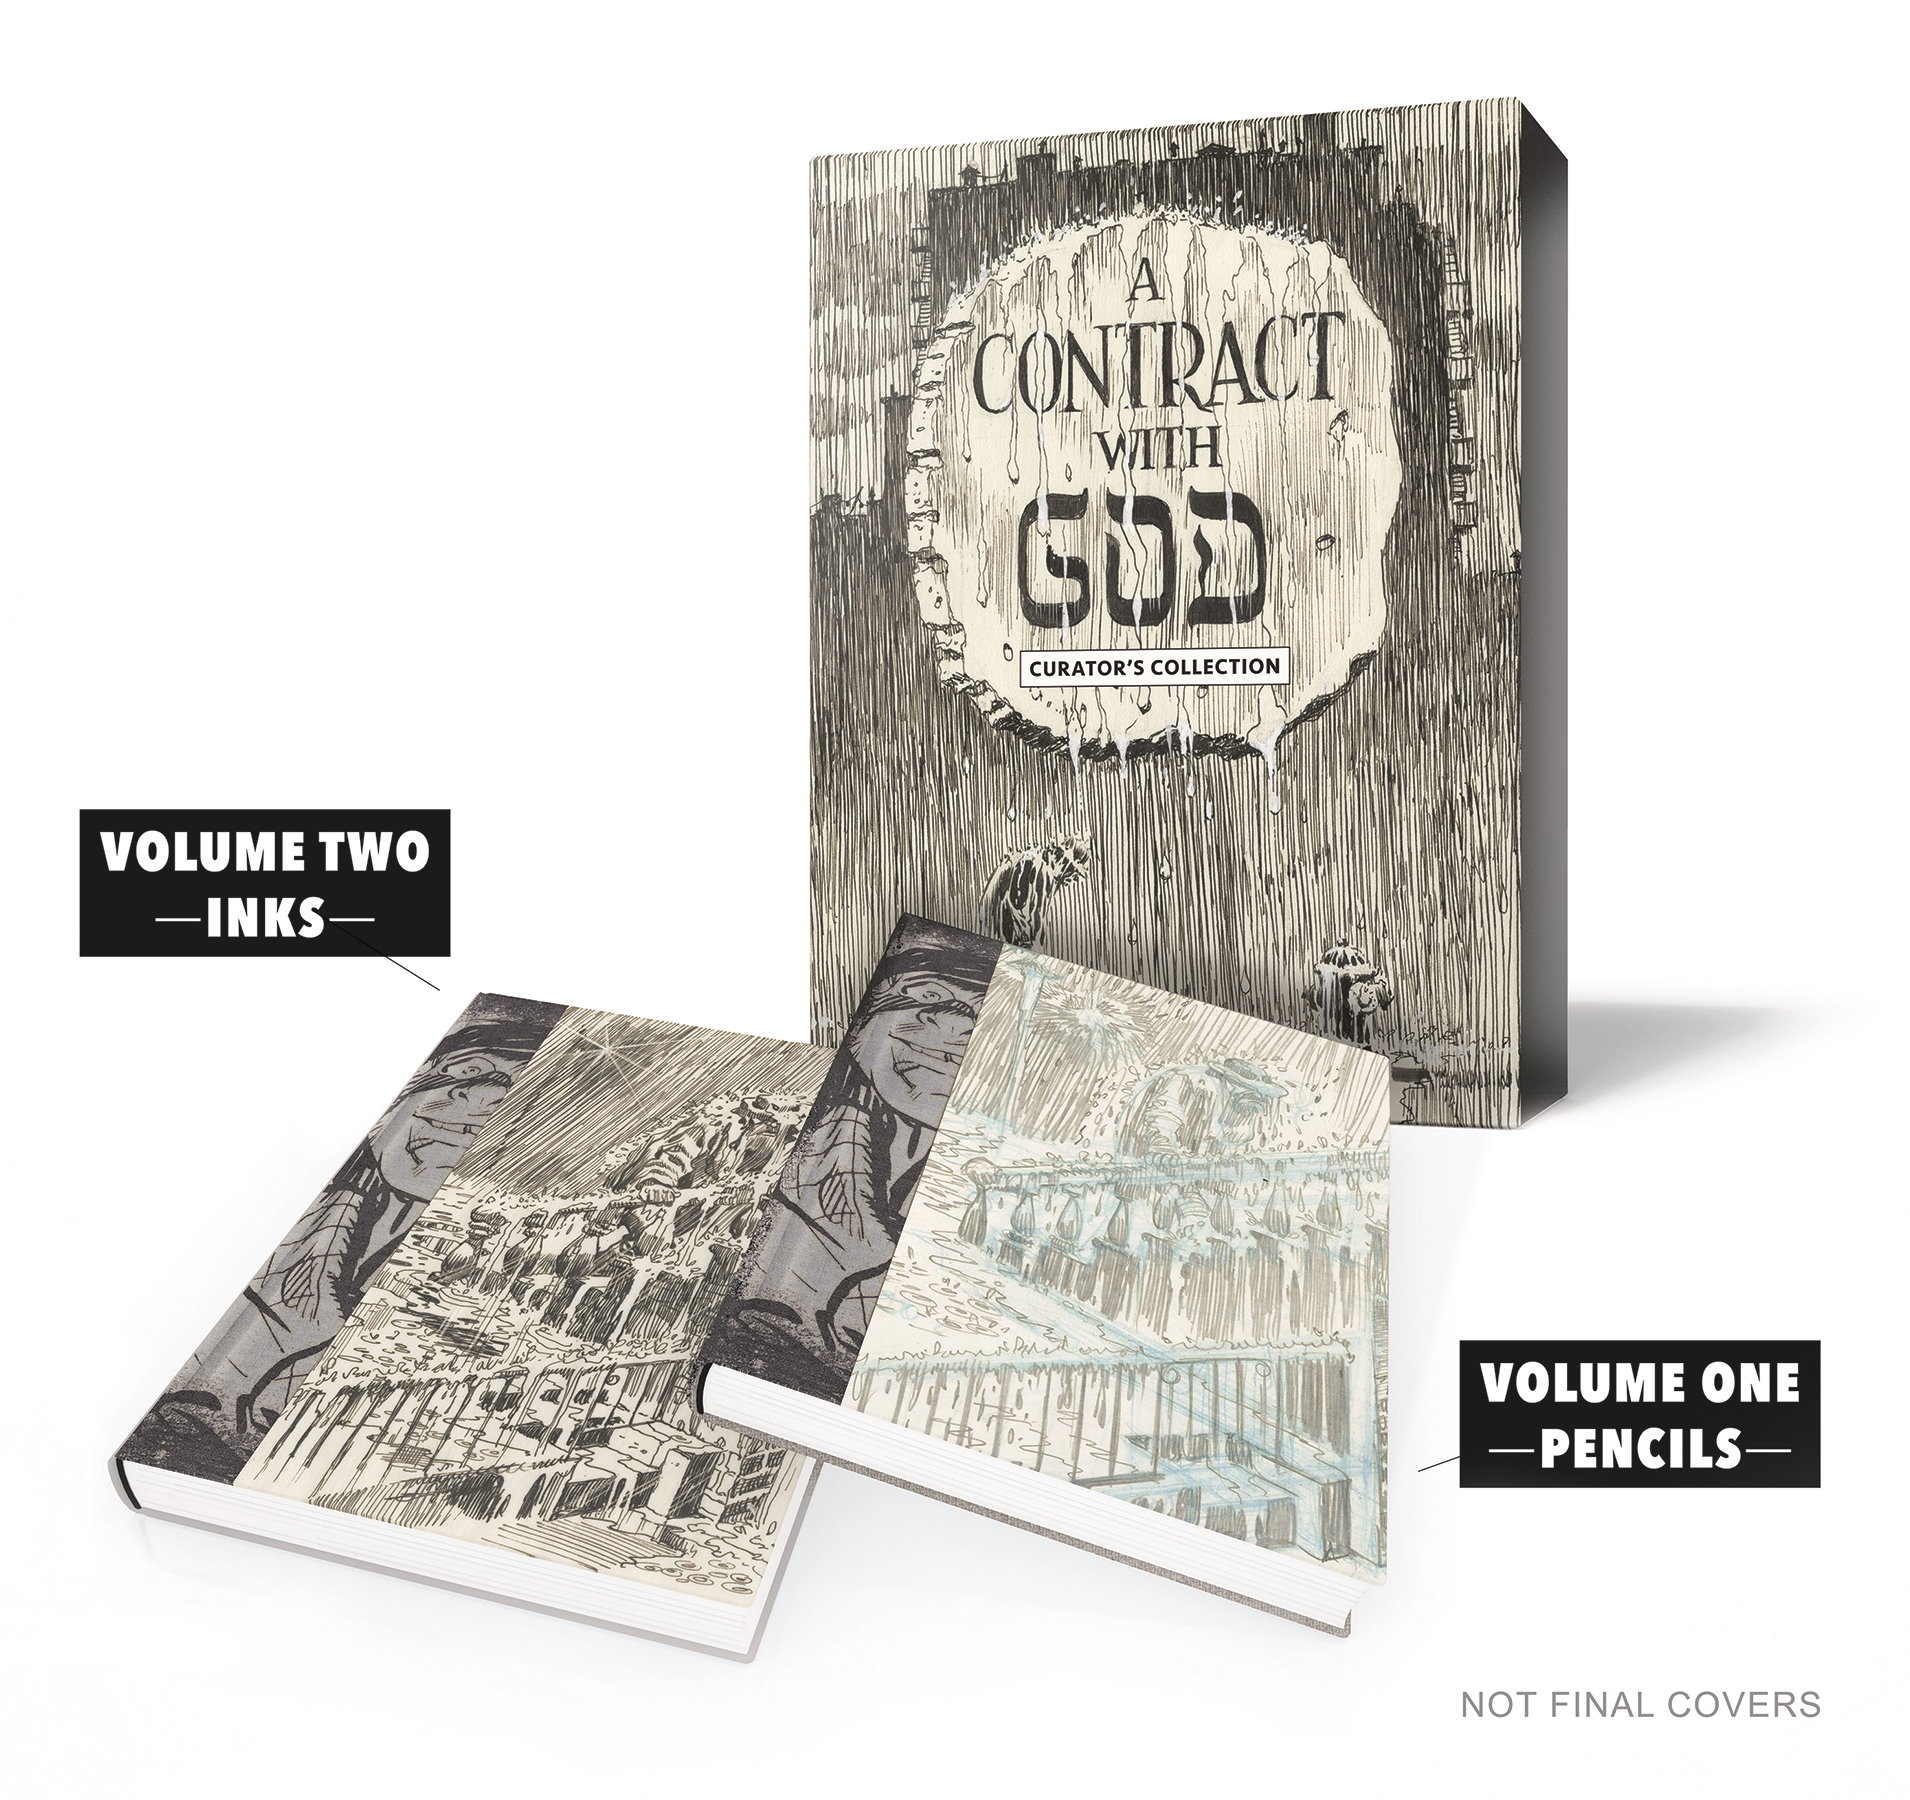 WILL EISNER CONTRACT WITH GOD CURATORS COLL HC LTD ED